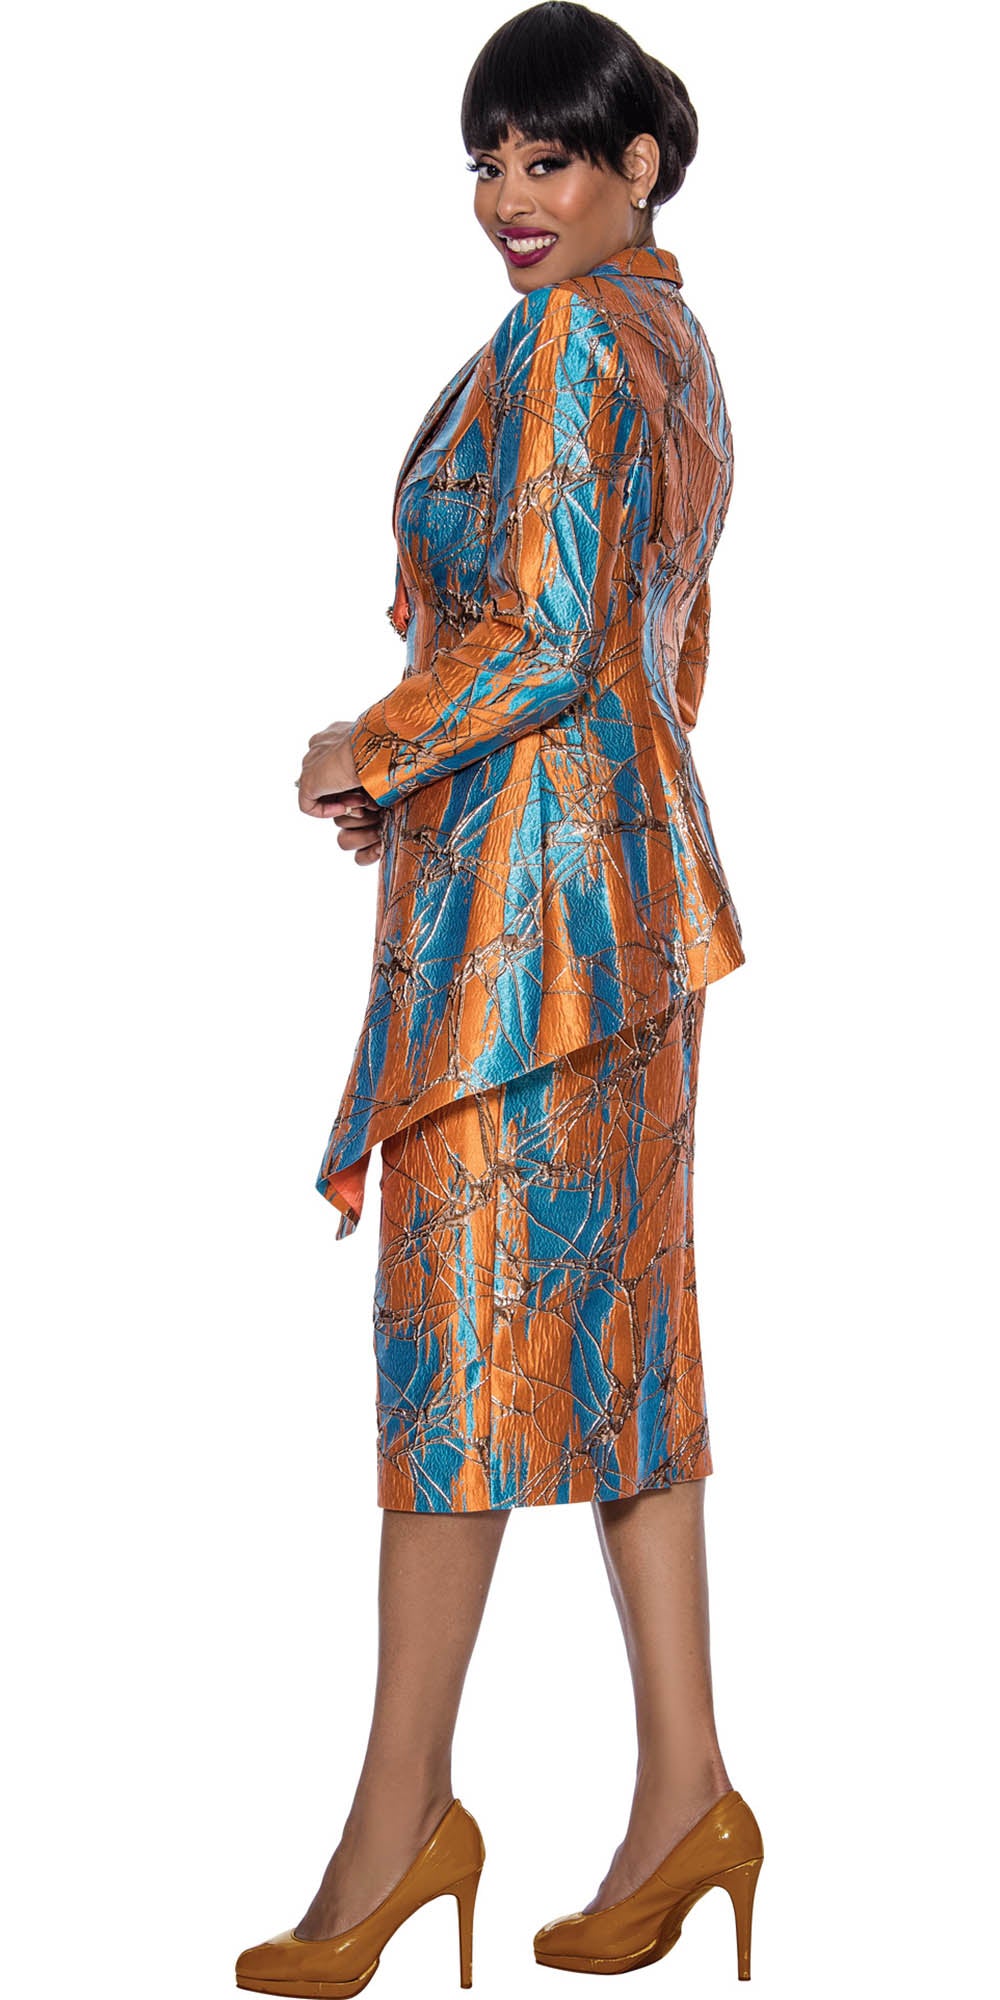 Divine Queen - 2203 - Print Two-tone 3pc Skirt Suit